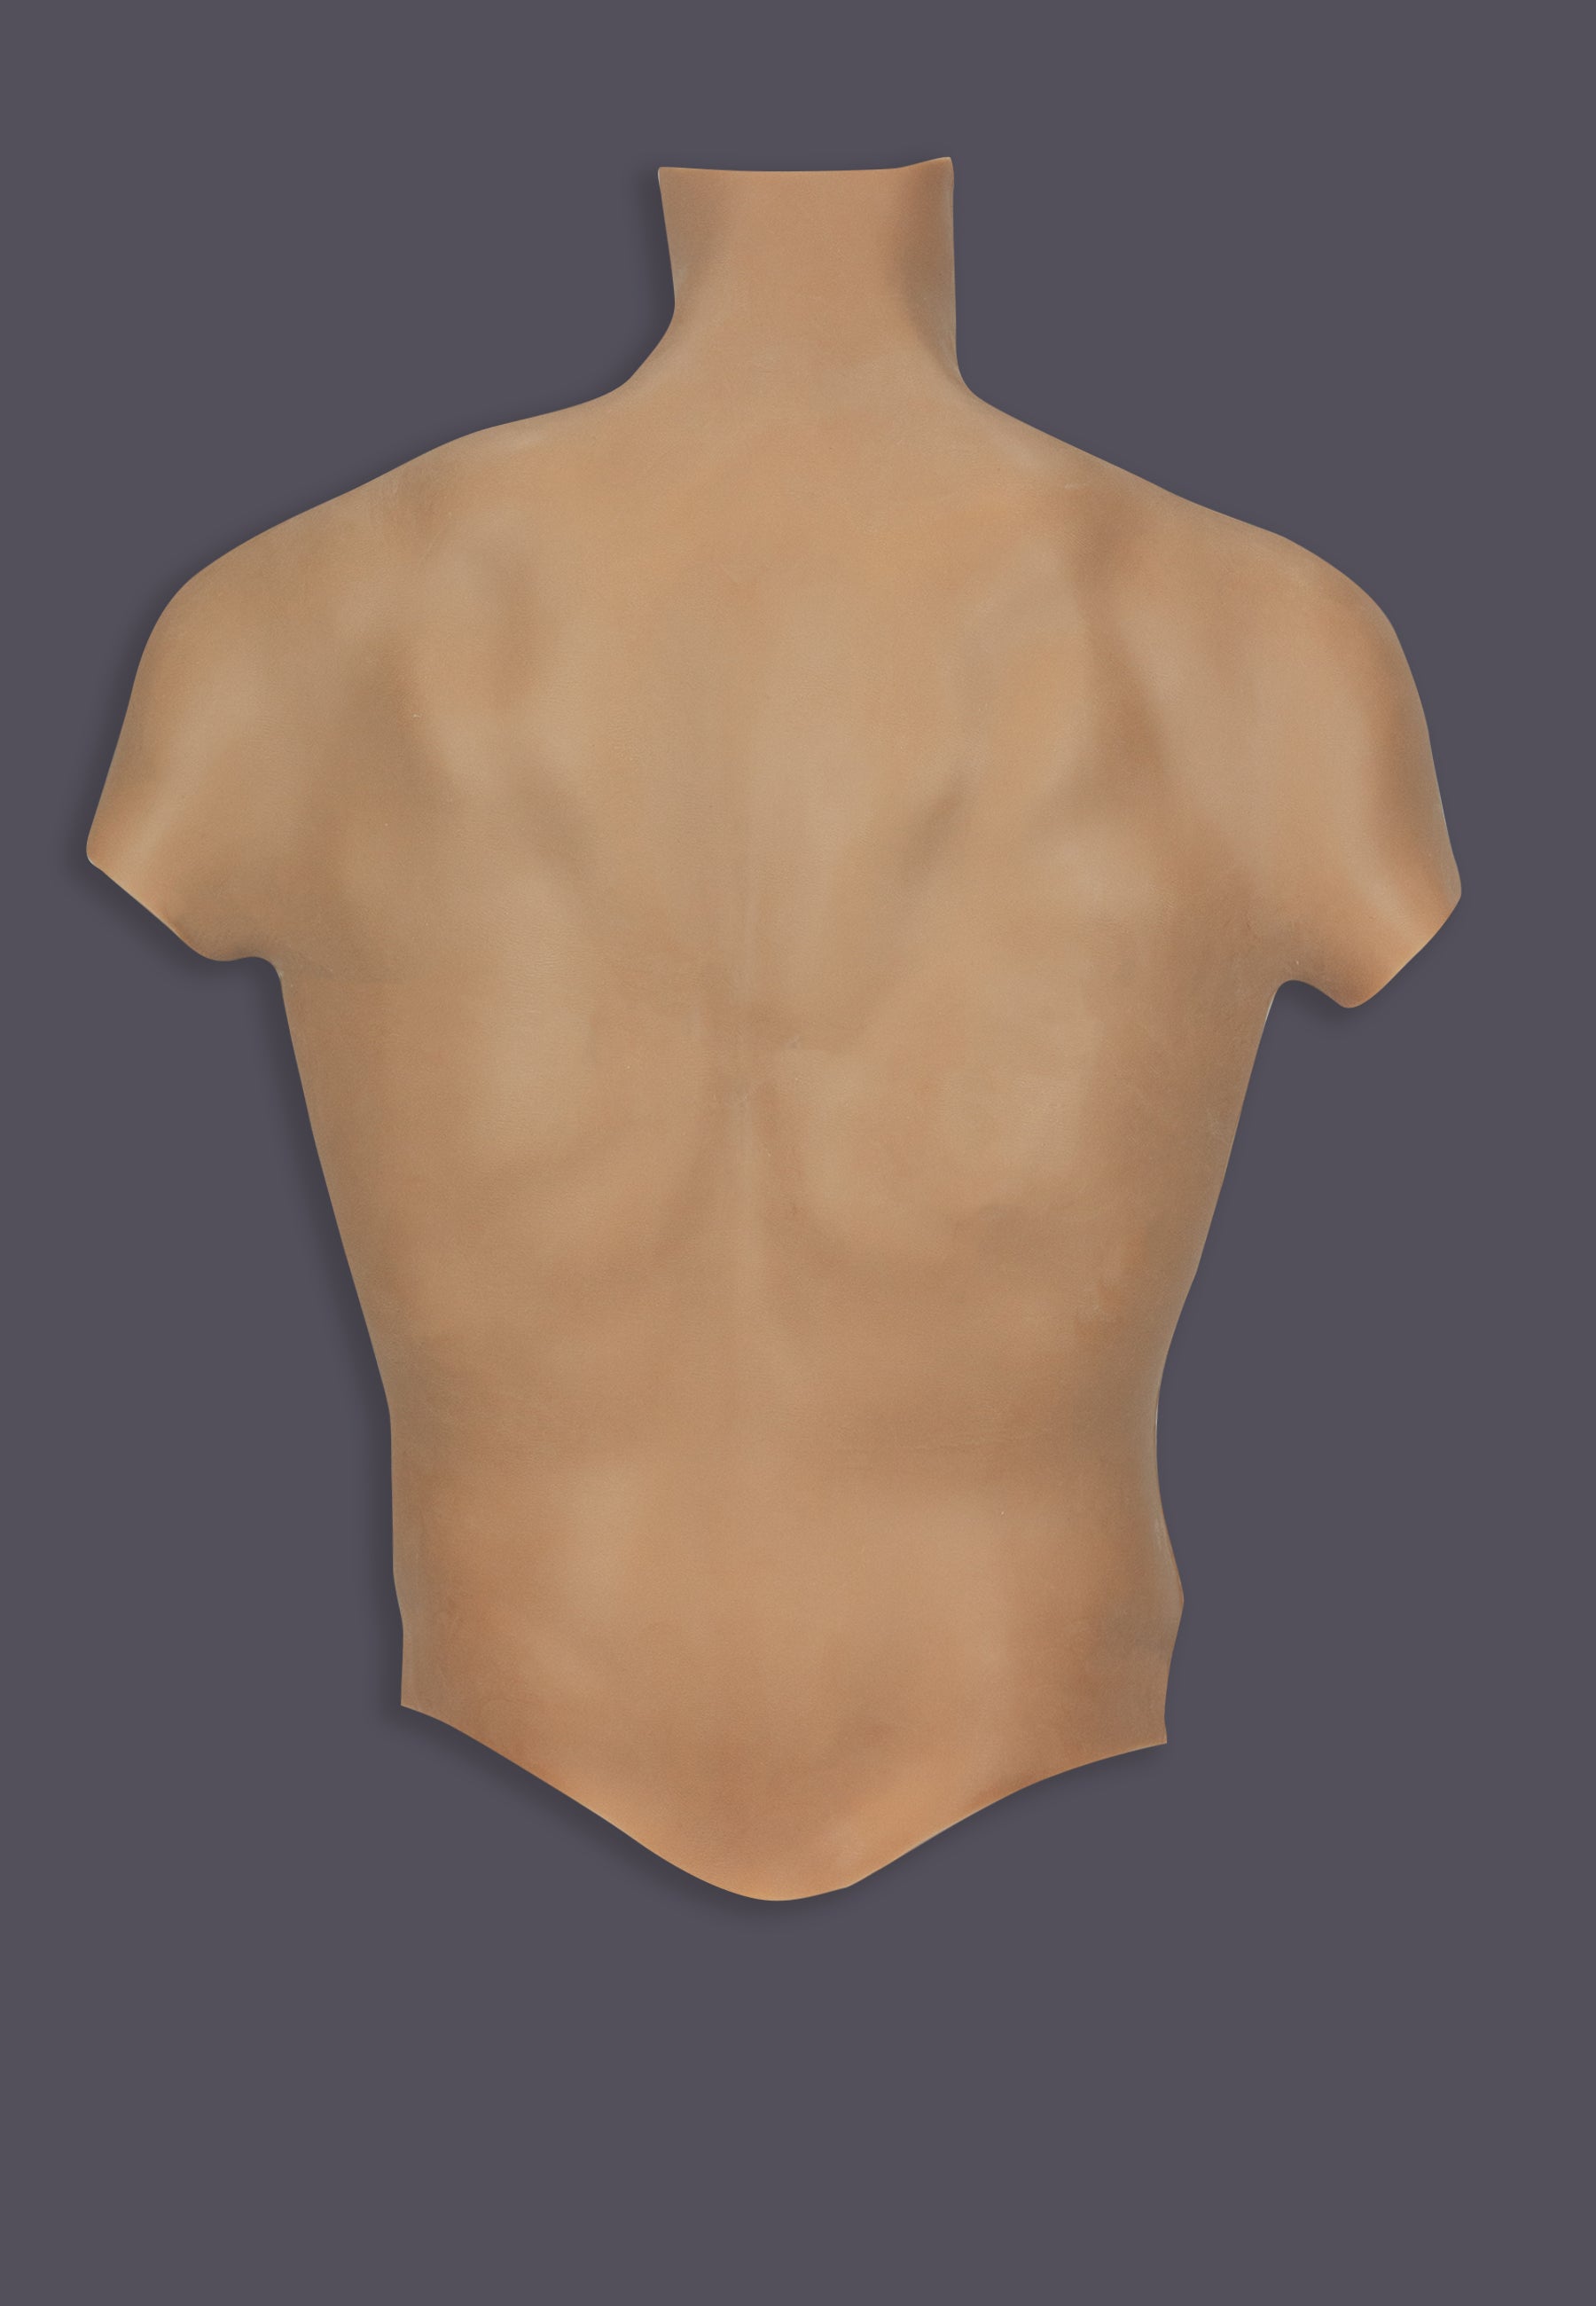 Back view of the Male Torso in the color caramel